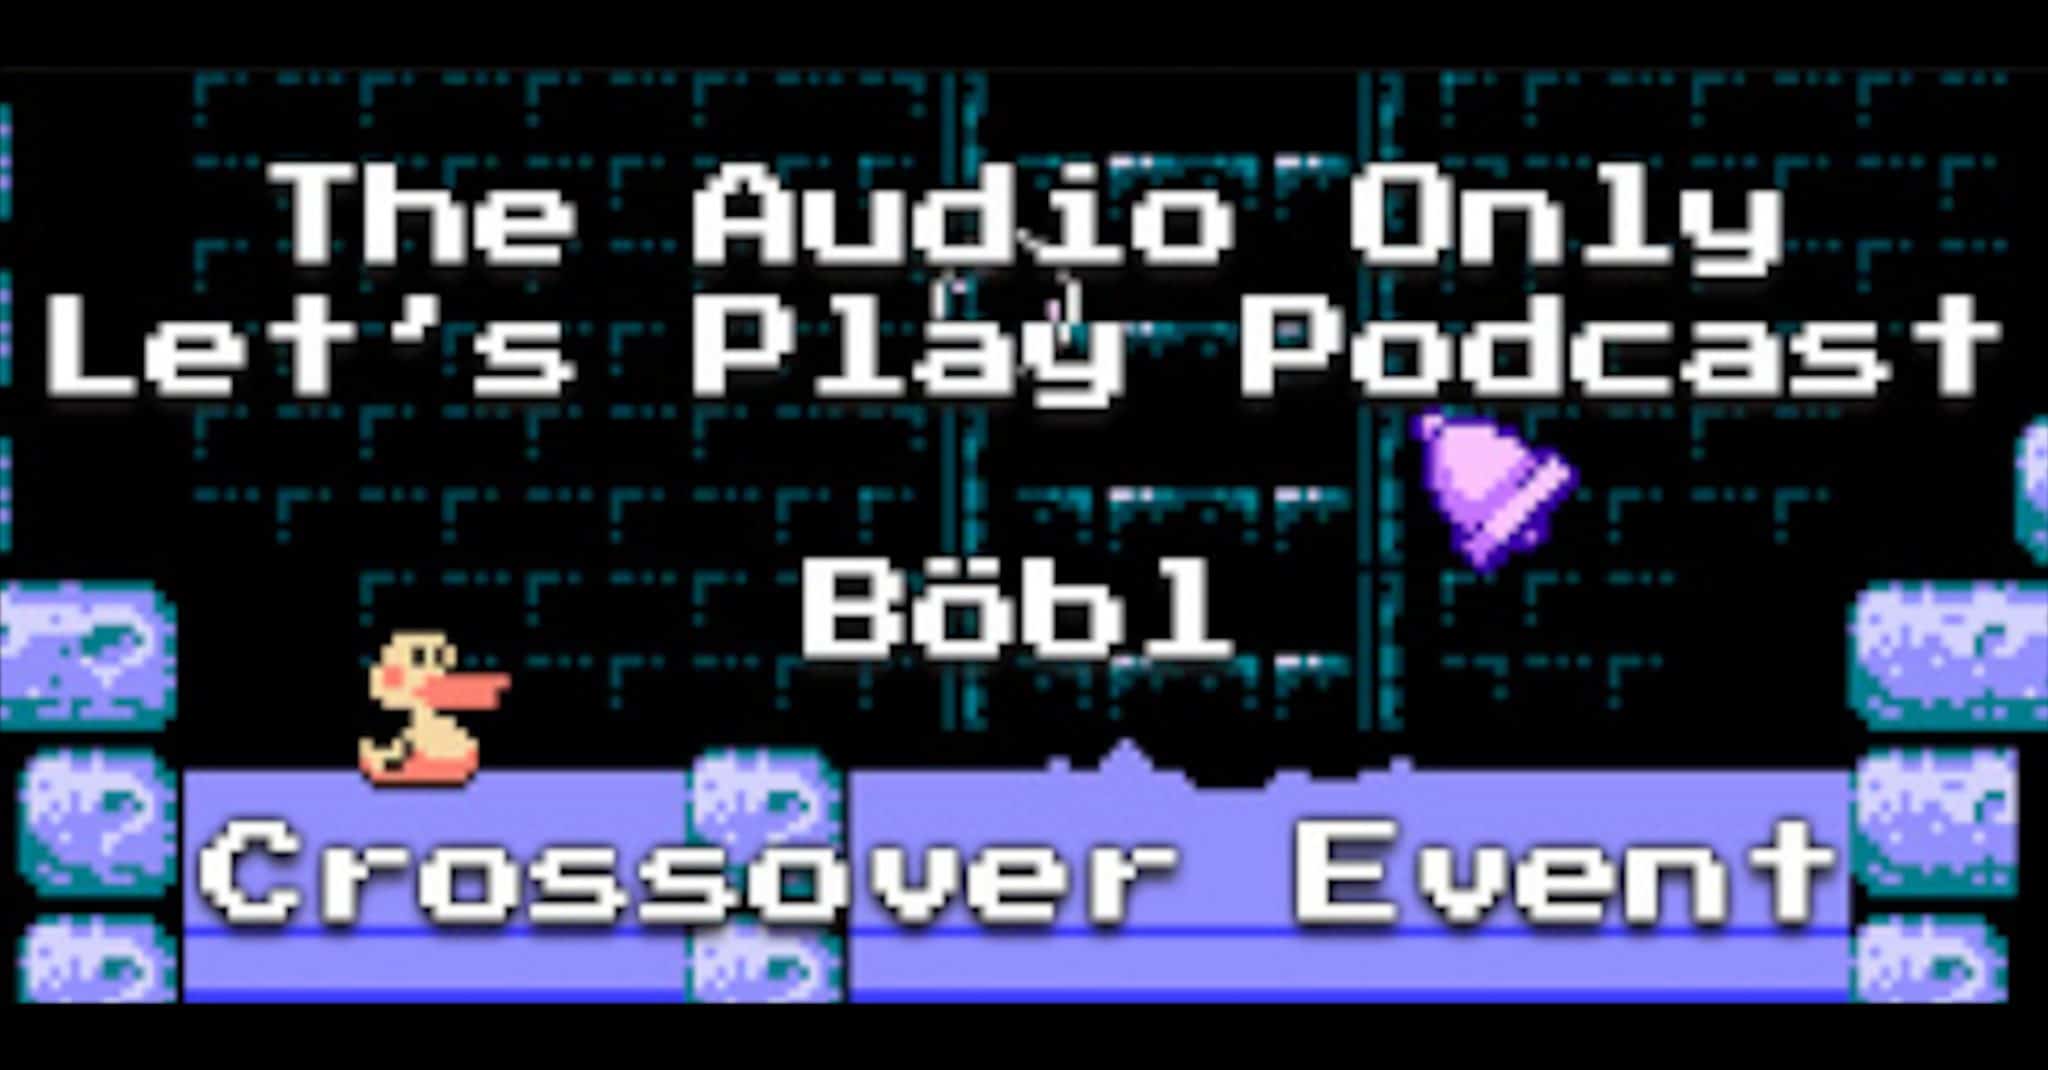 The Audio Only Let's Play Podcast Böbl Crossover Event